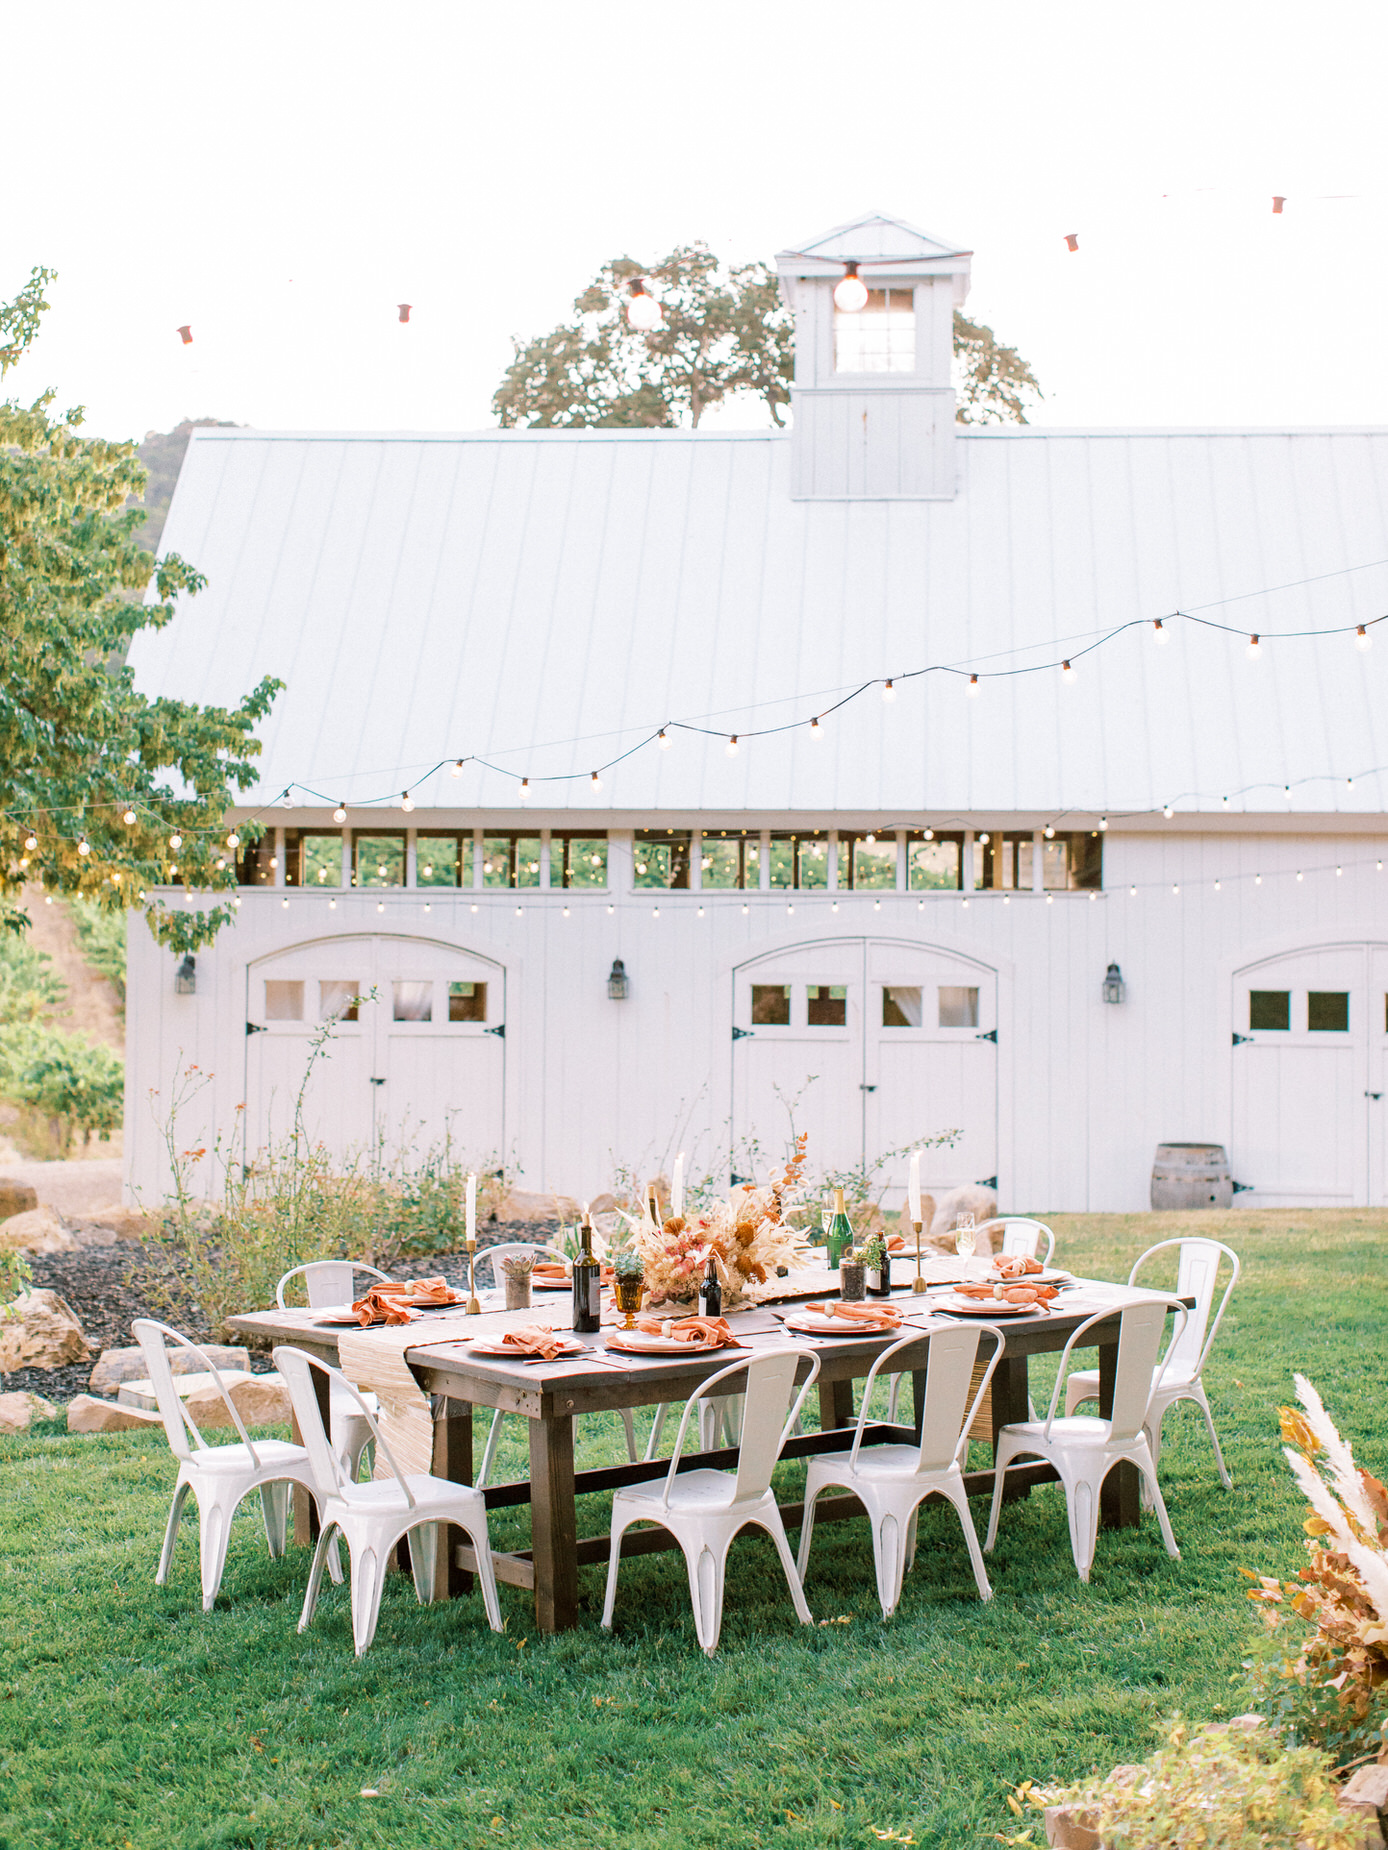 Elegant white barn with outdoor wedding table Central Coast Wedding Venues